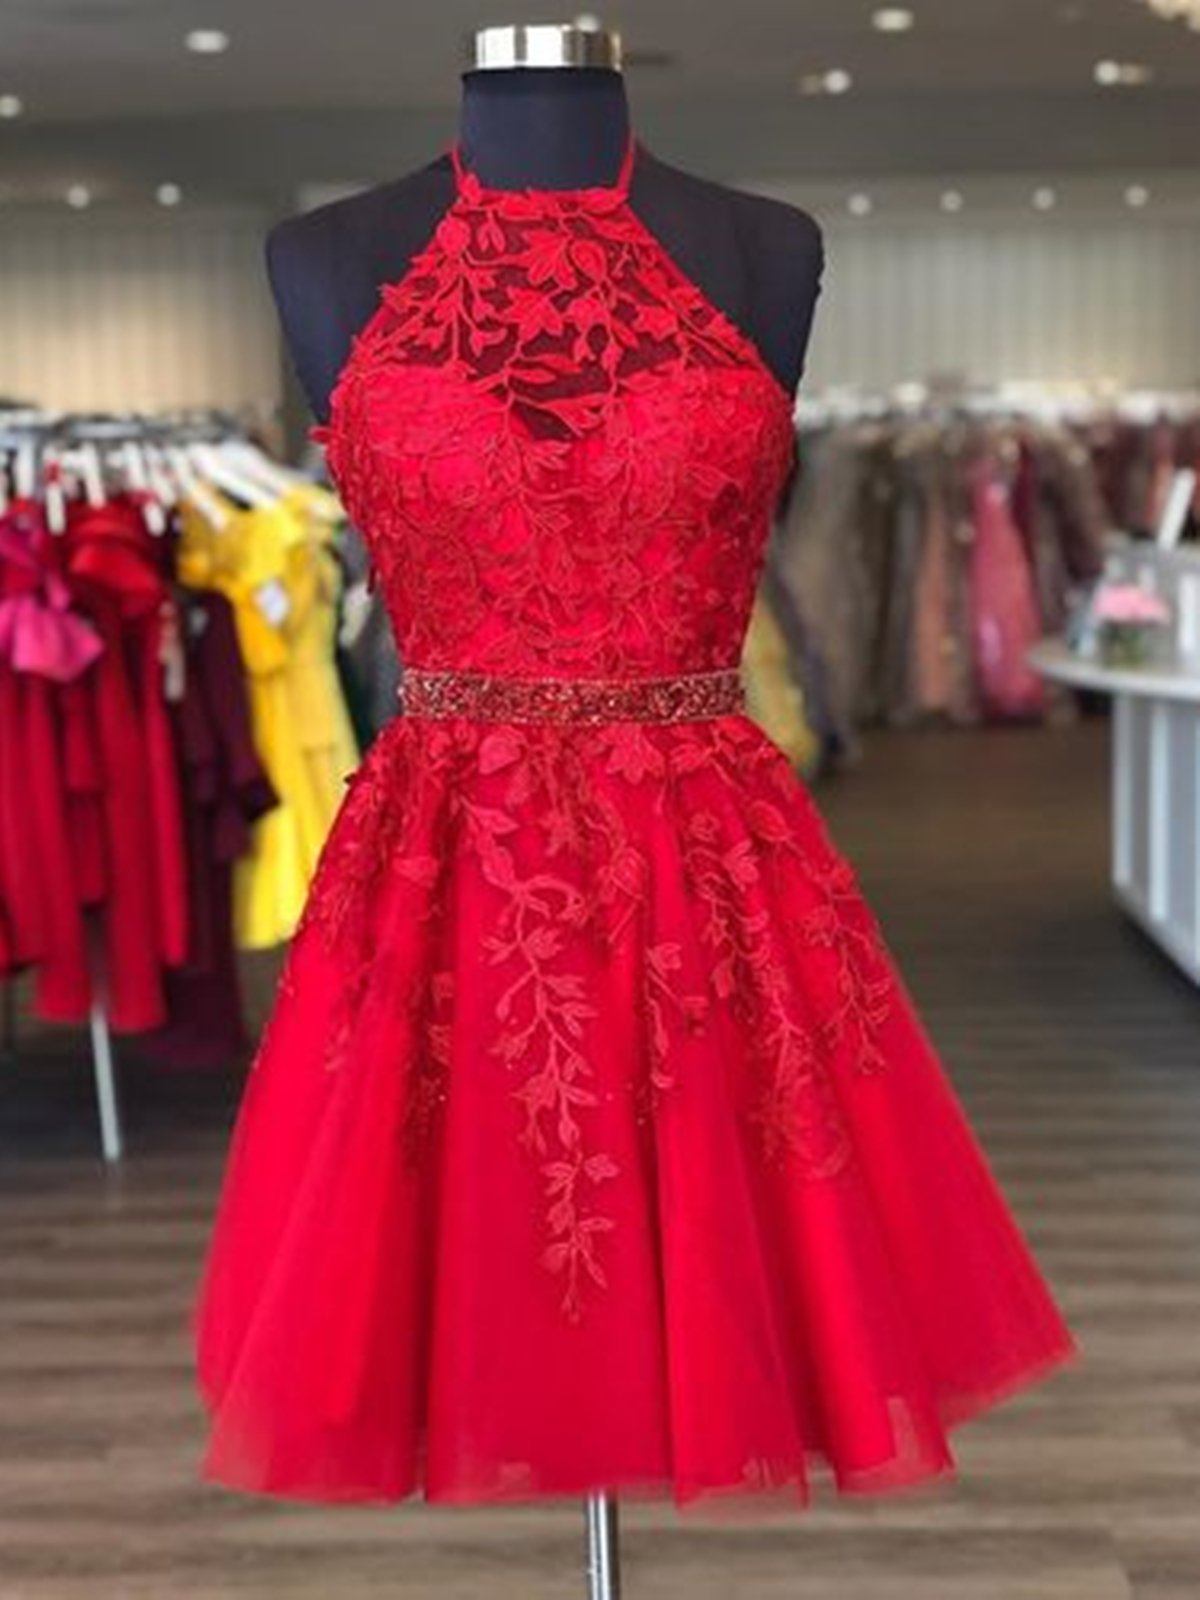 Halter Neck Short Red Lace Prom Dresses For Black girls For Women, Short Red Lace Formal Homecoming Dresses